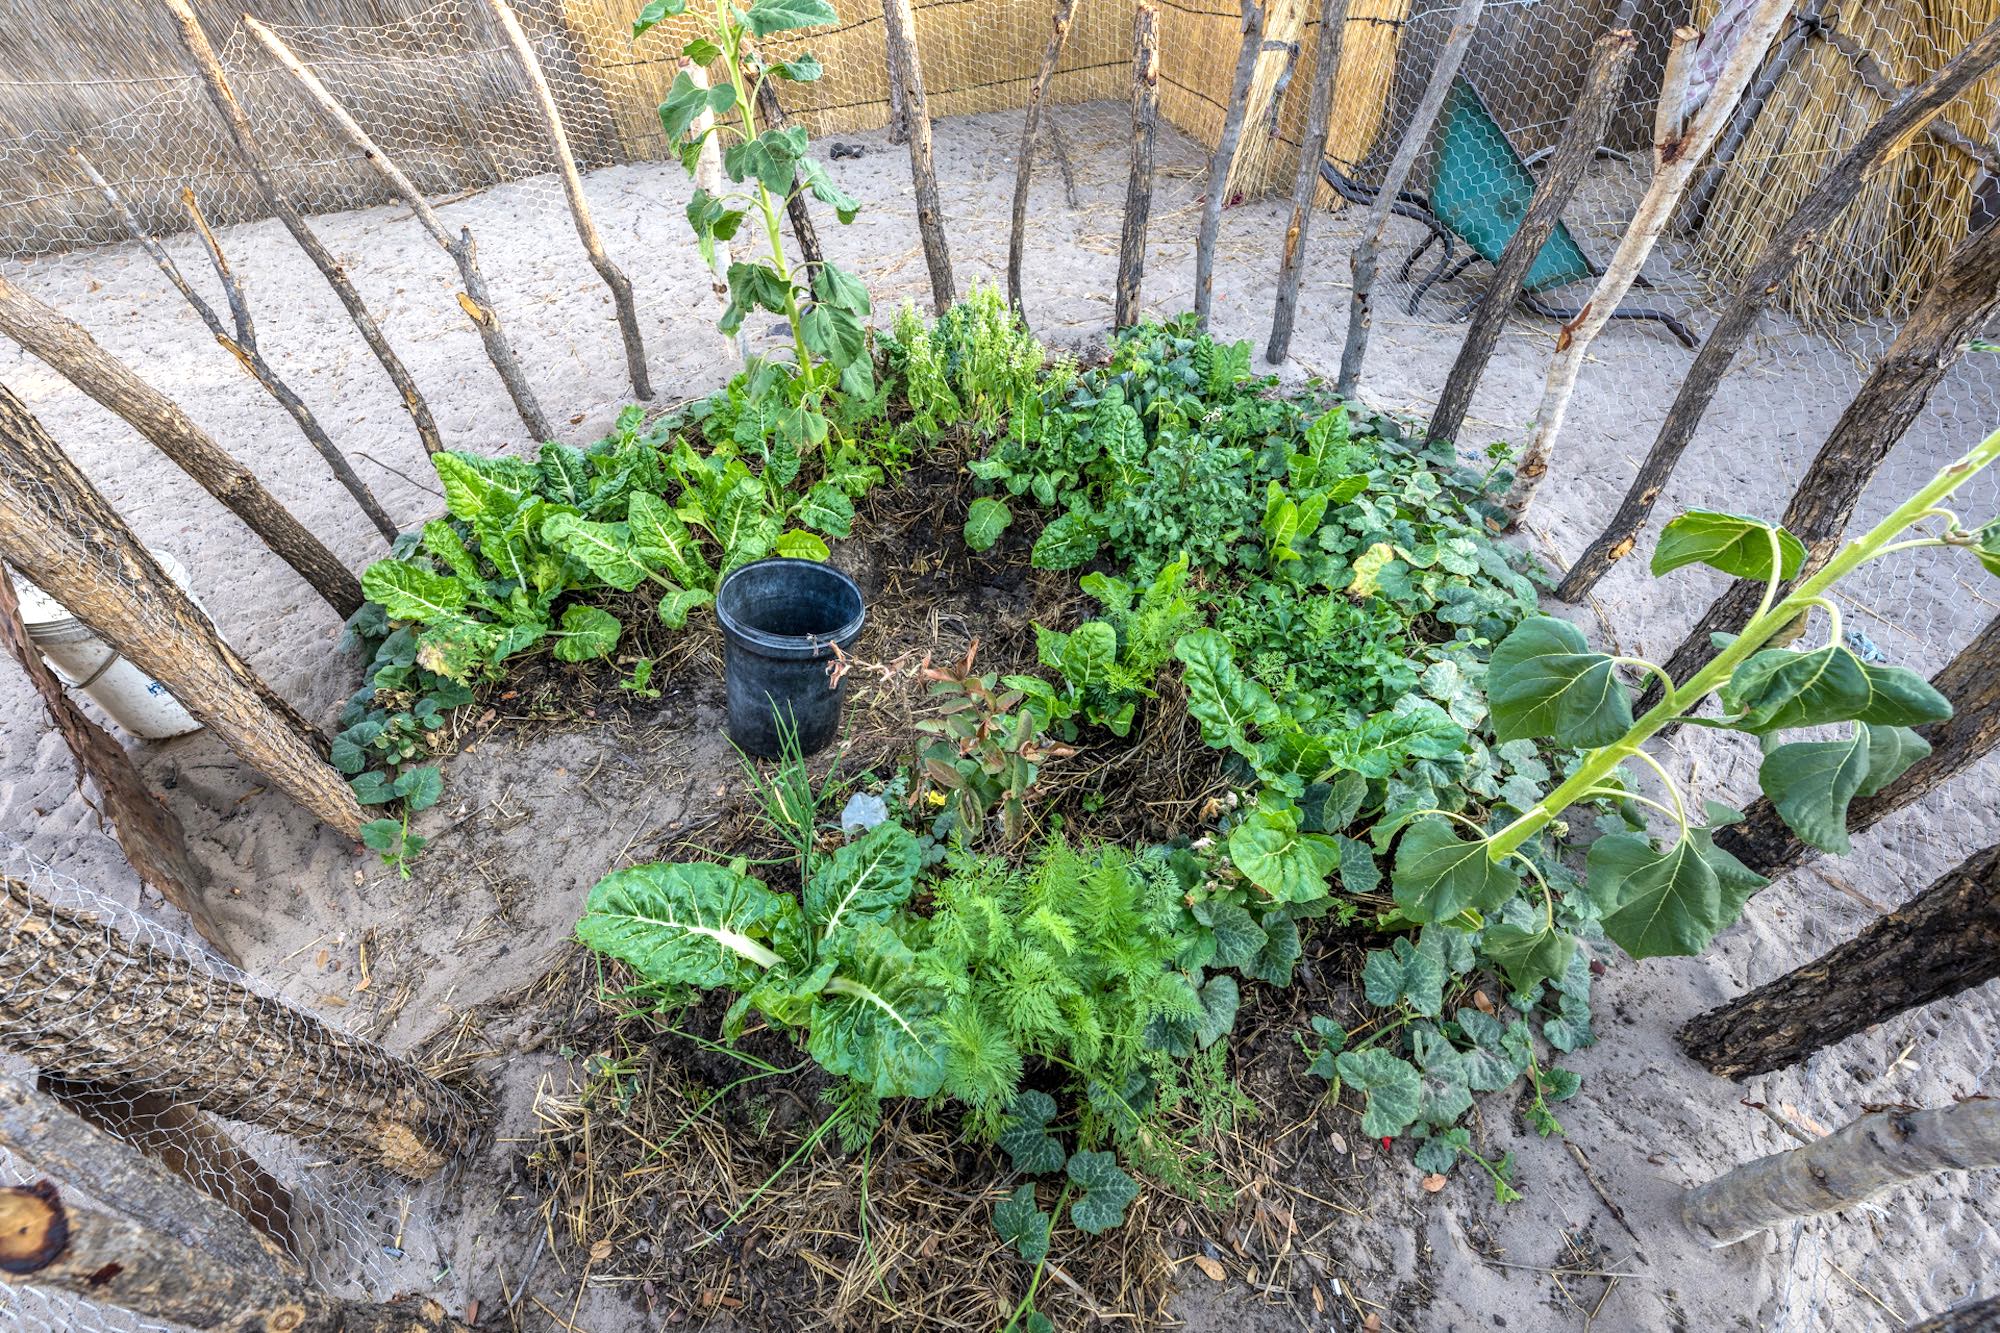 A circle of green plants in a small ringed enclosure.